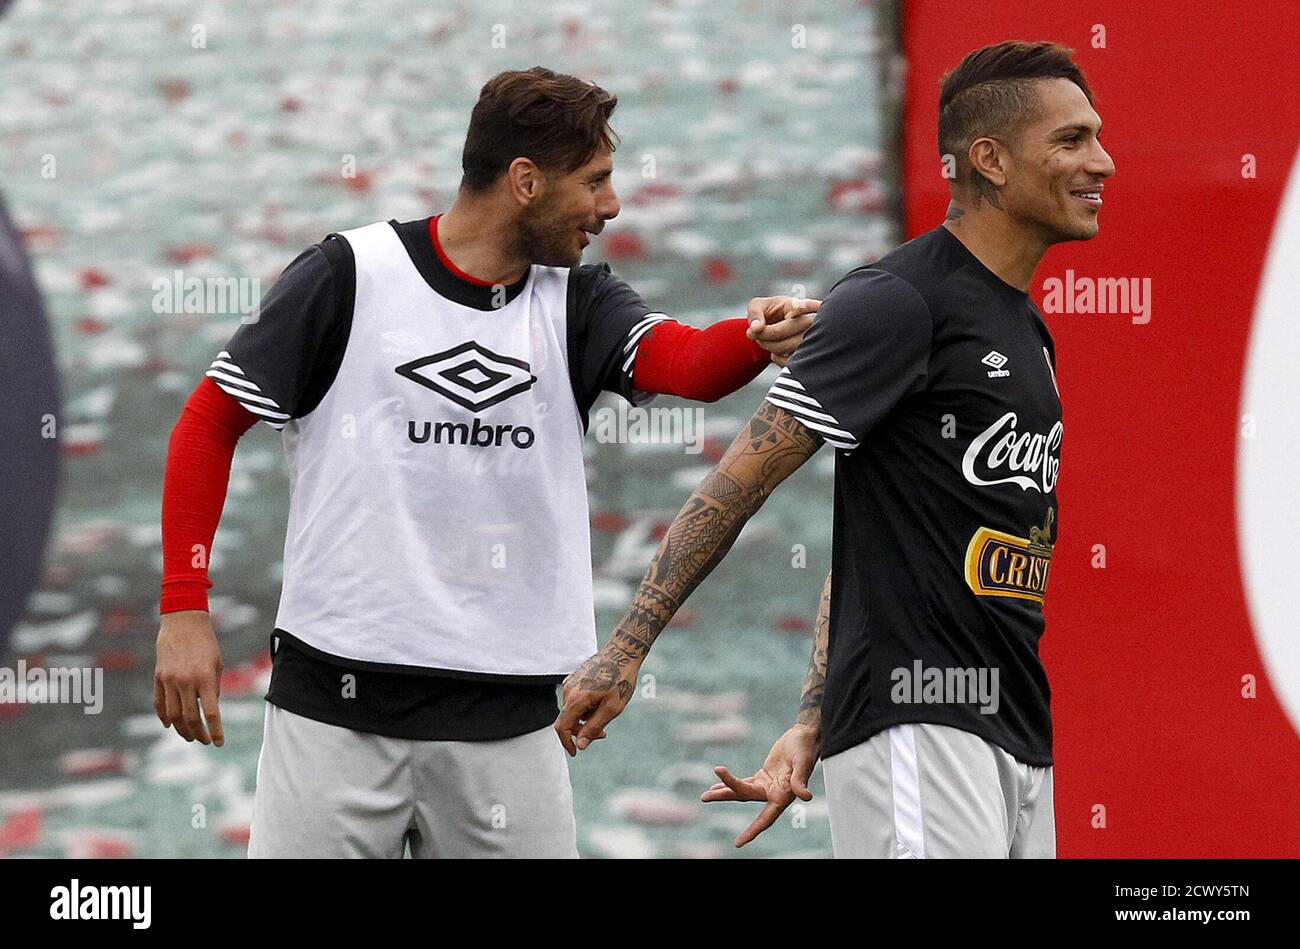 Peru's national team soccer player Claudio Pizarro (L) and Paolo Guerrero  take part in a training session, ahead of the Copa America tournament, in  Lima, June 2, 2015. Peru will play the